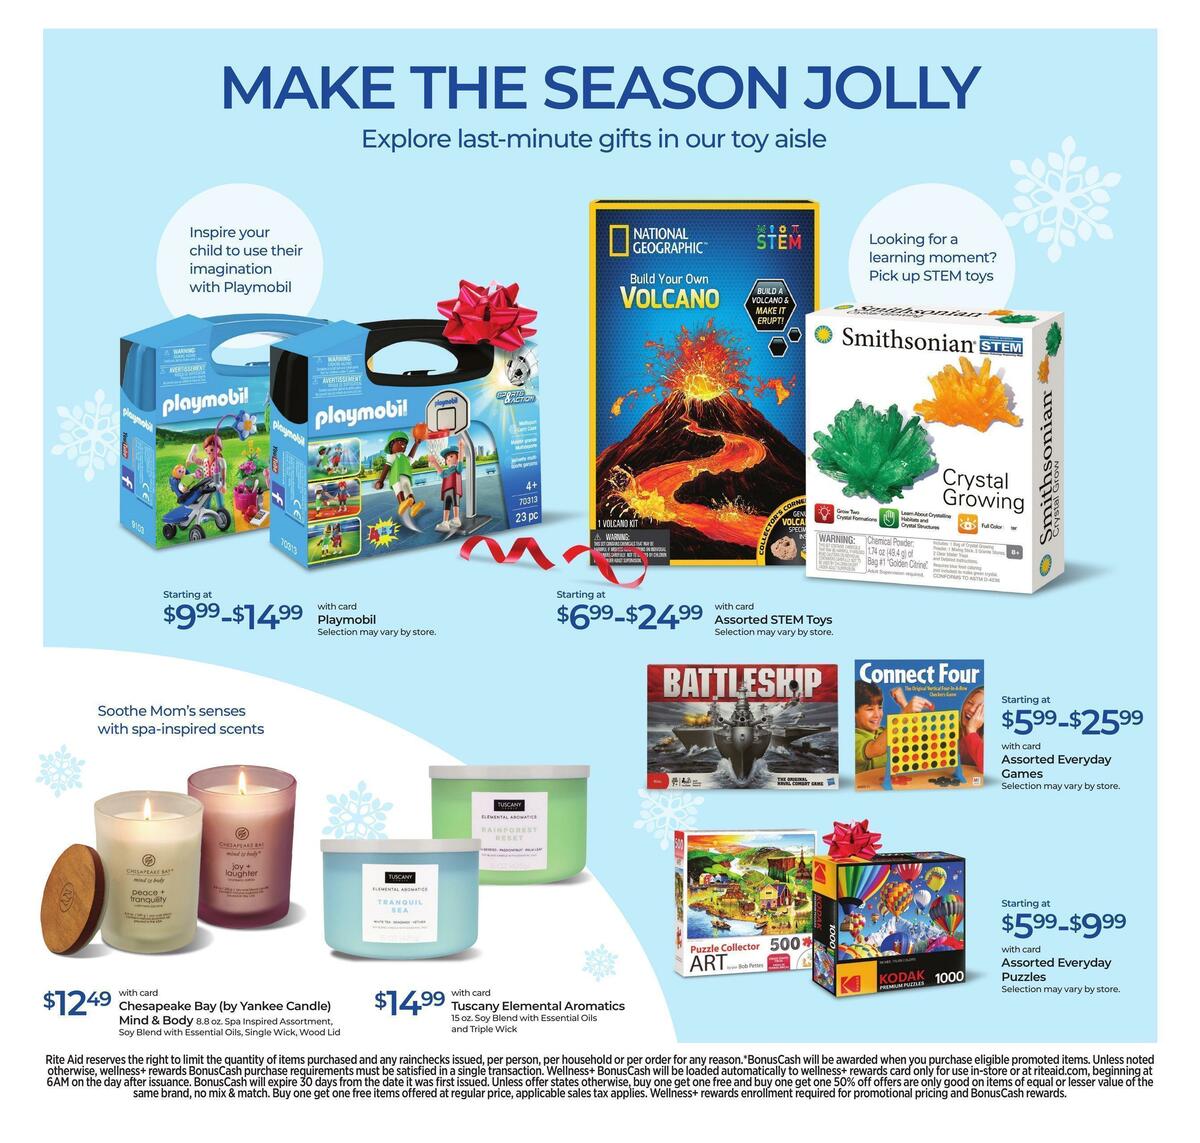 Rite Aid Weekly Ad from December 19